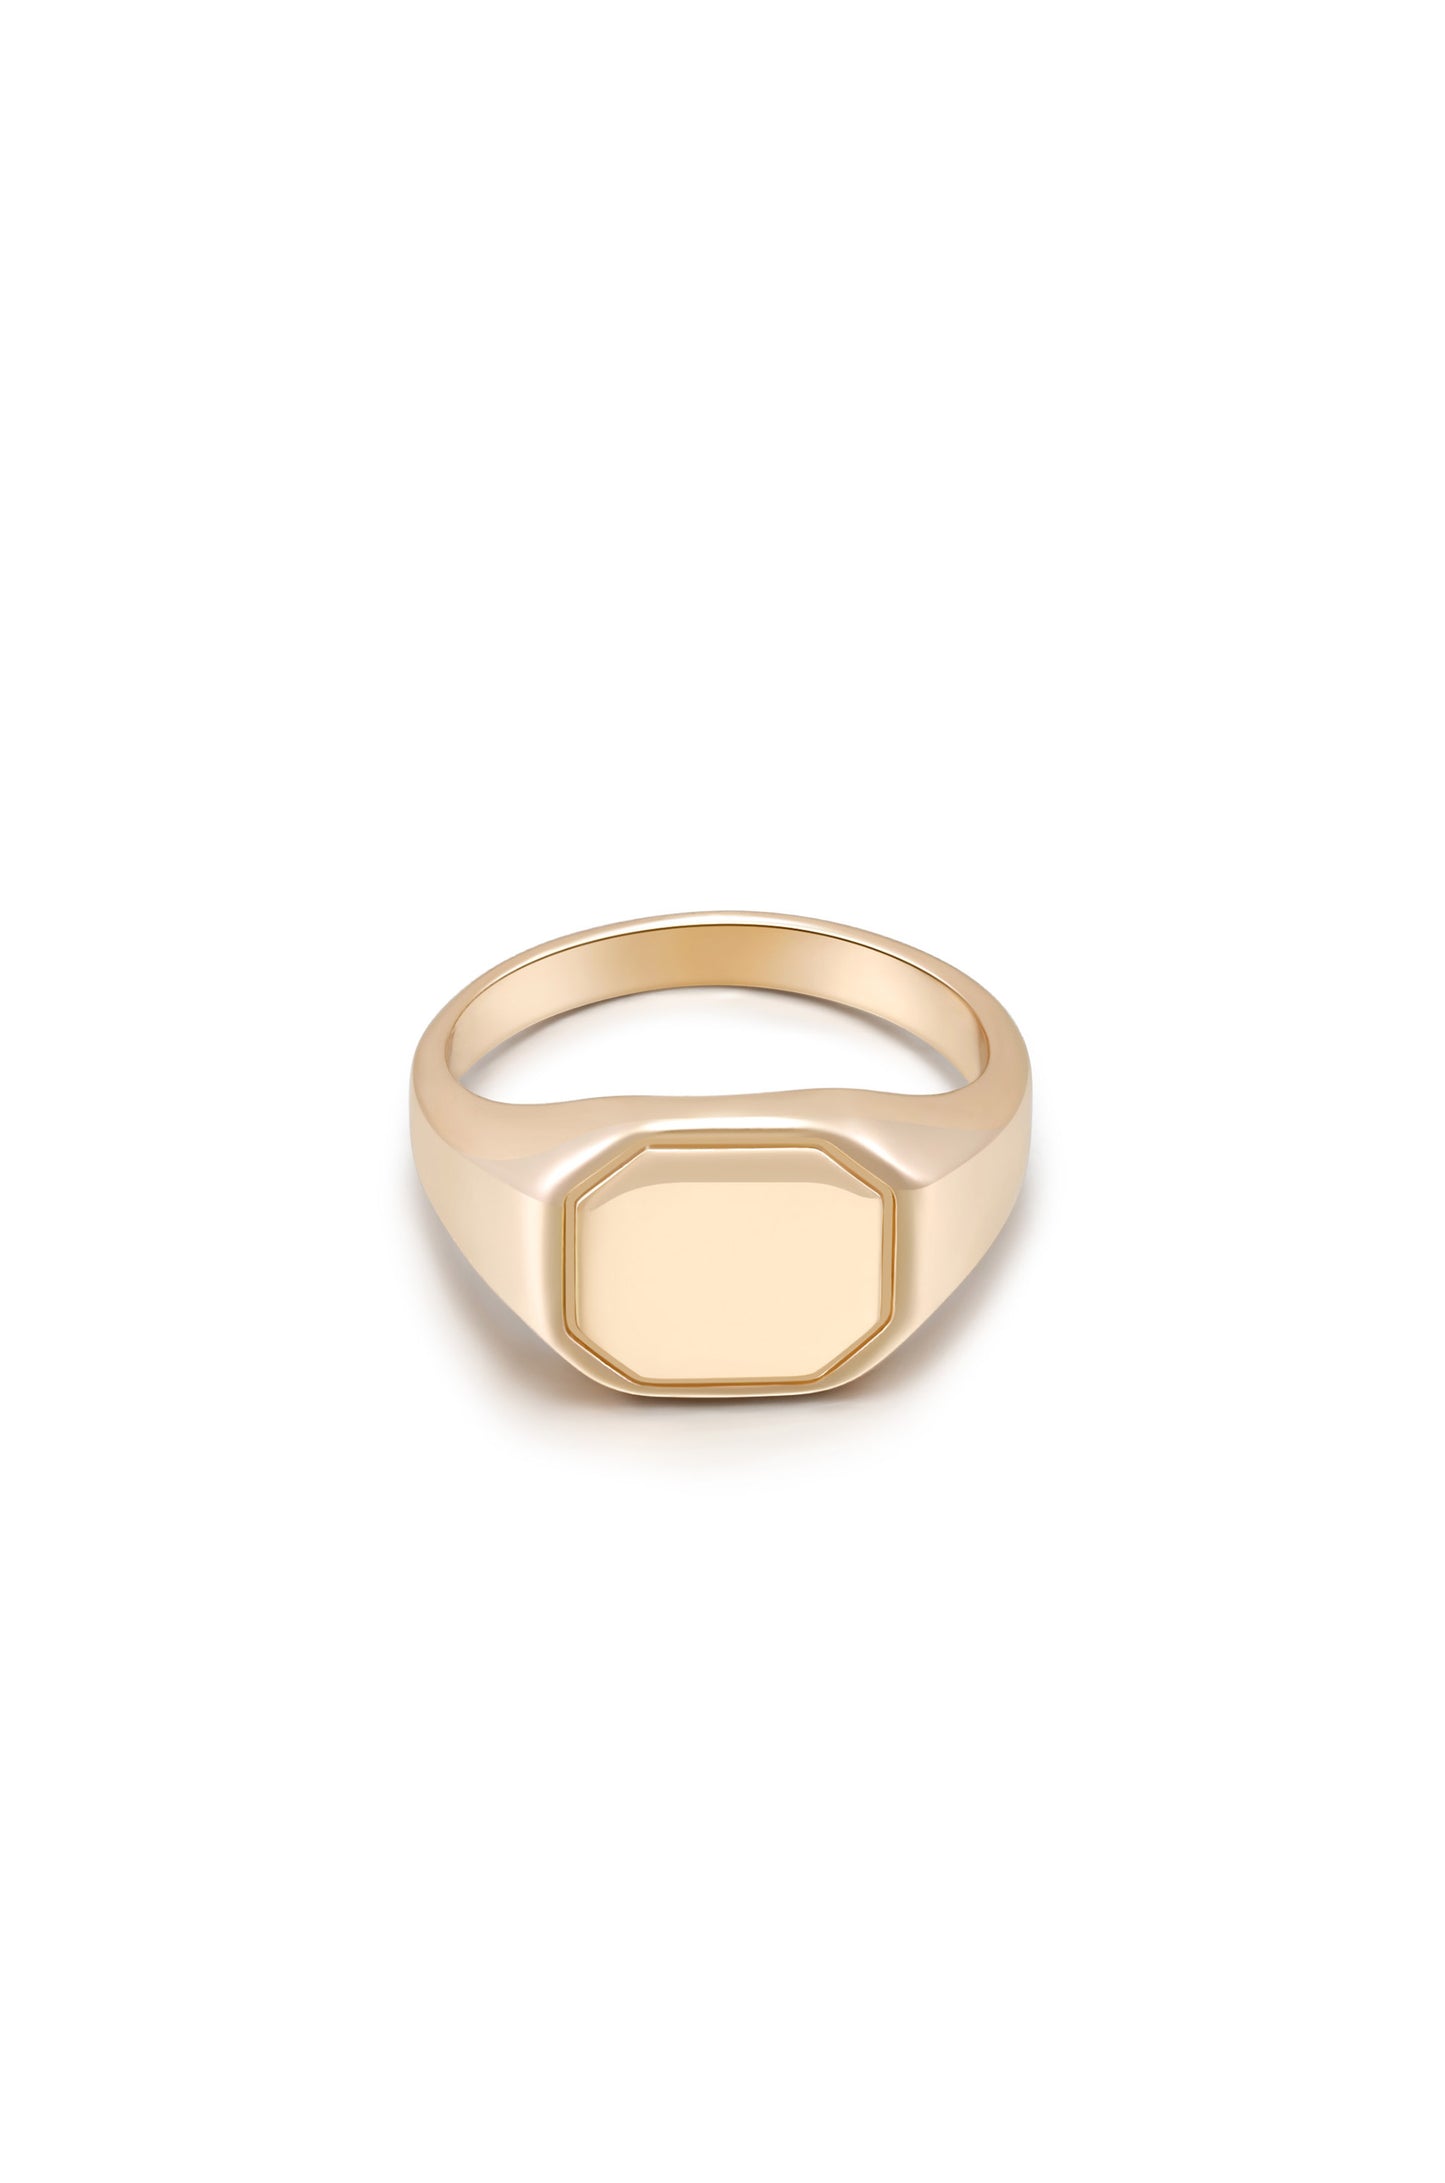 18k Gold Plated Signet Ring